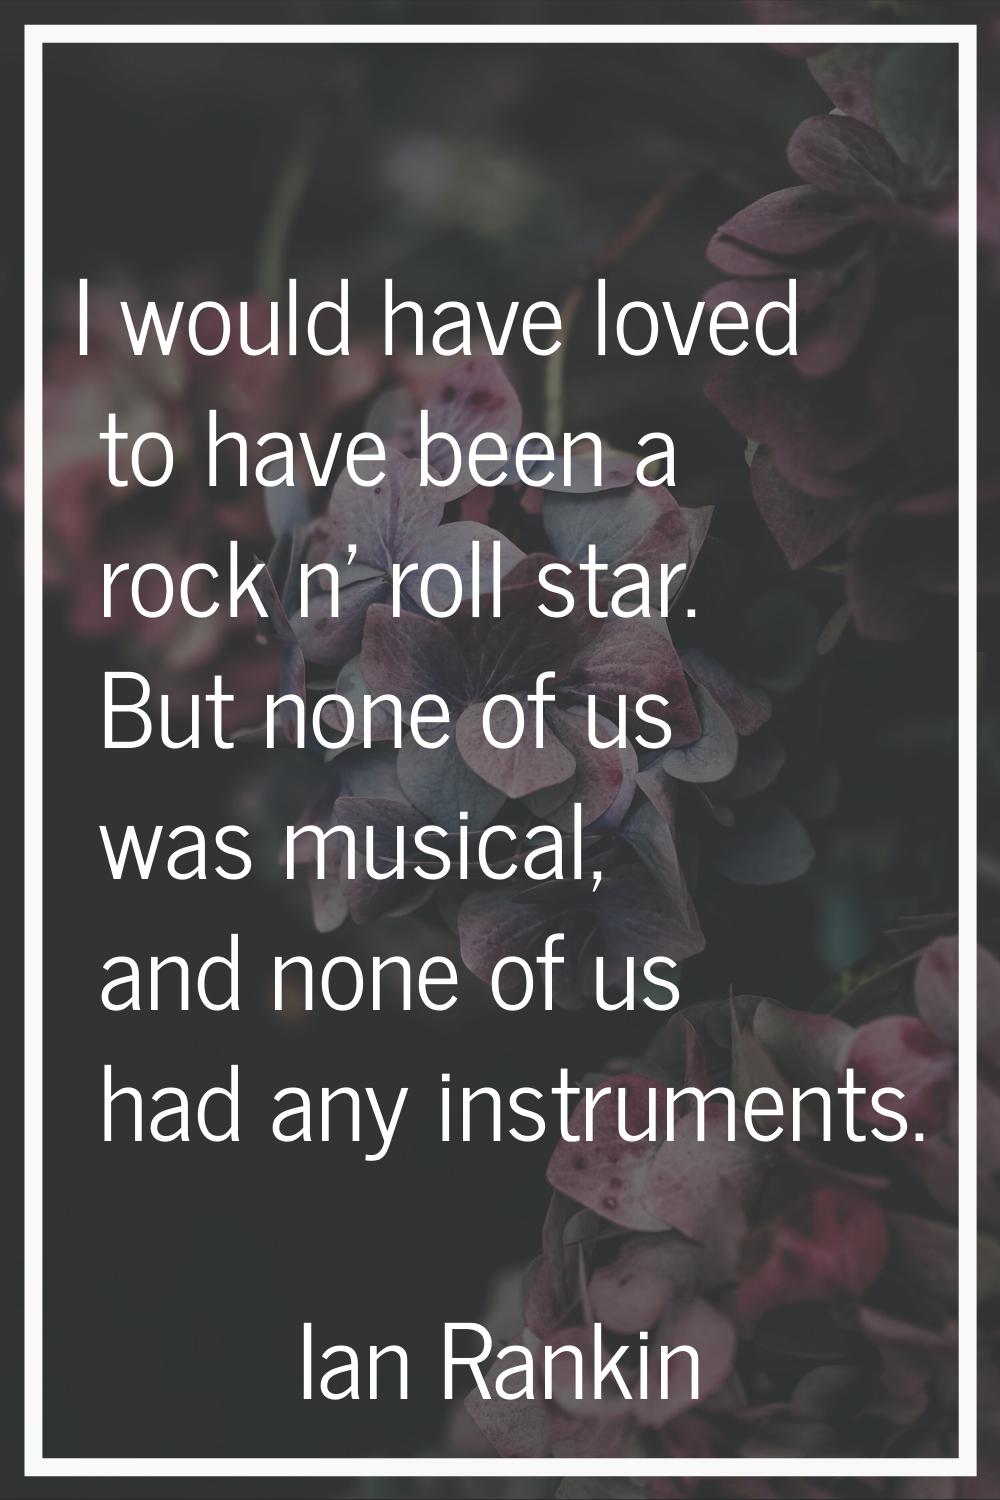 I would have loved to have been a rock n' roll star. But none of us was musical, and none of us had